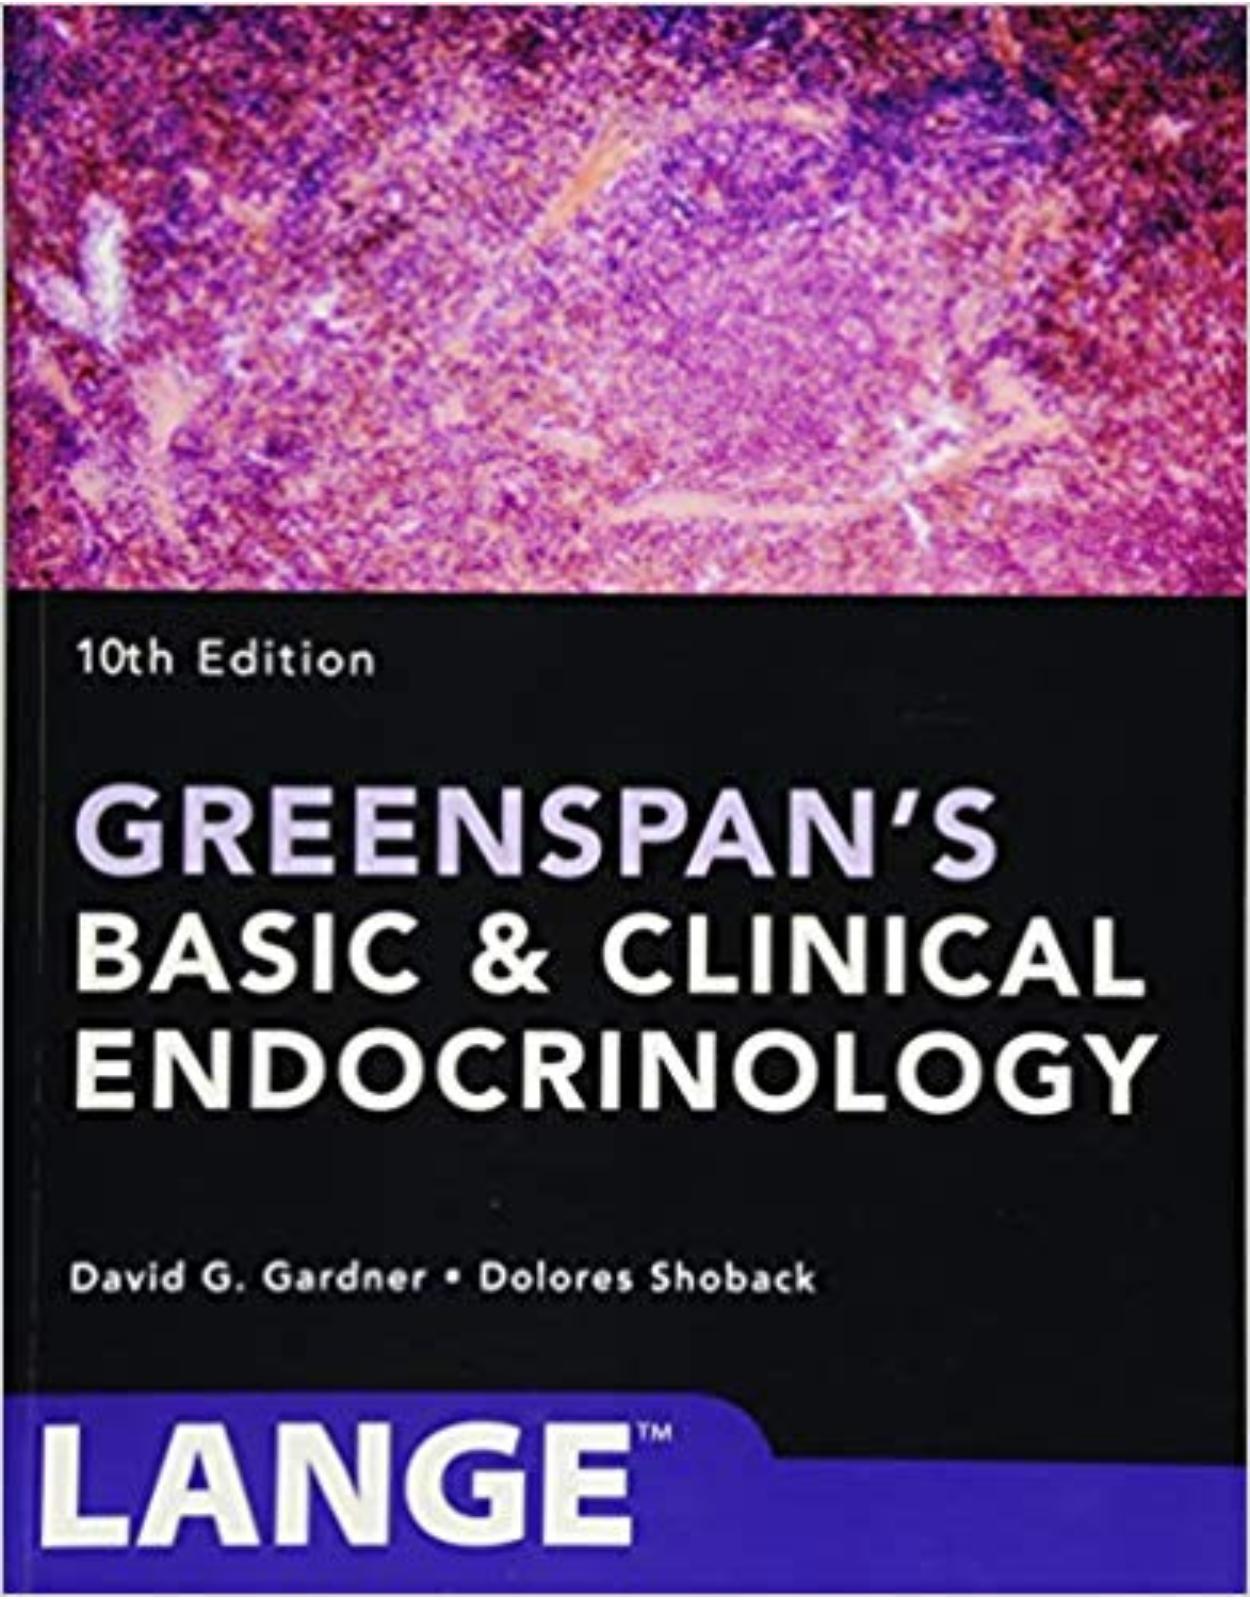 Greenspan's Basic and Clinical Endocrinology, Tenth Edition